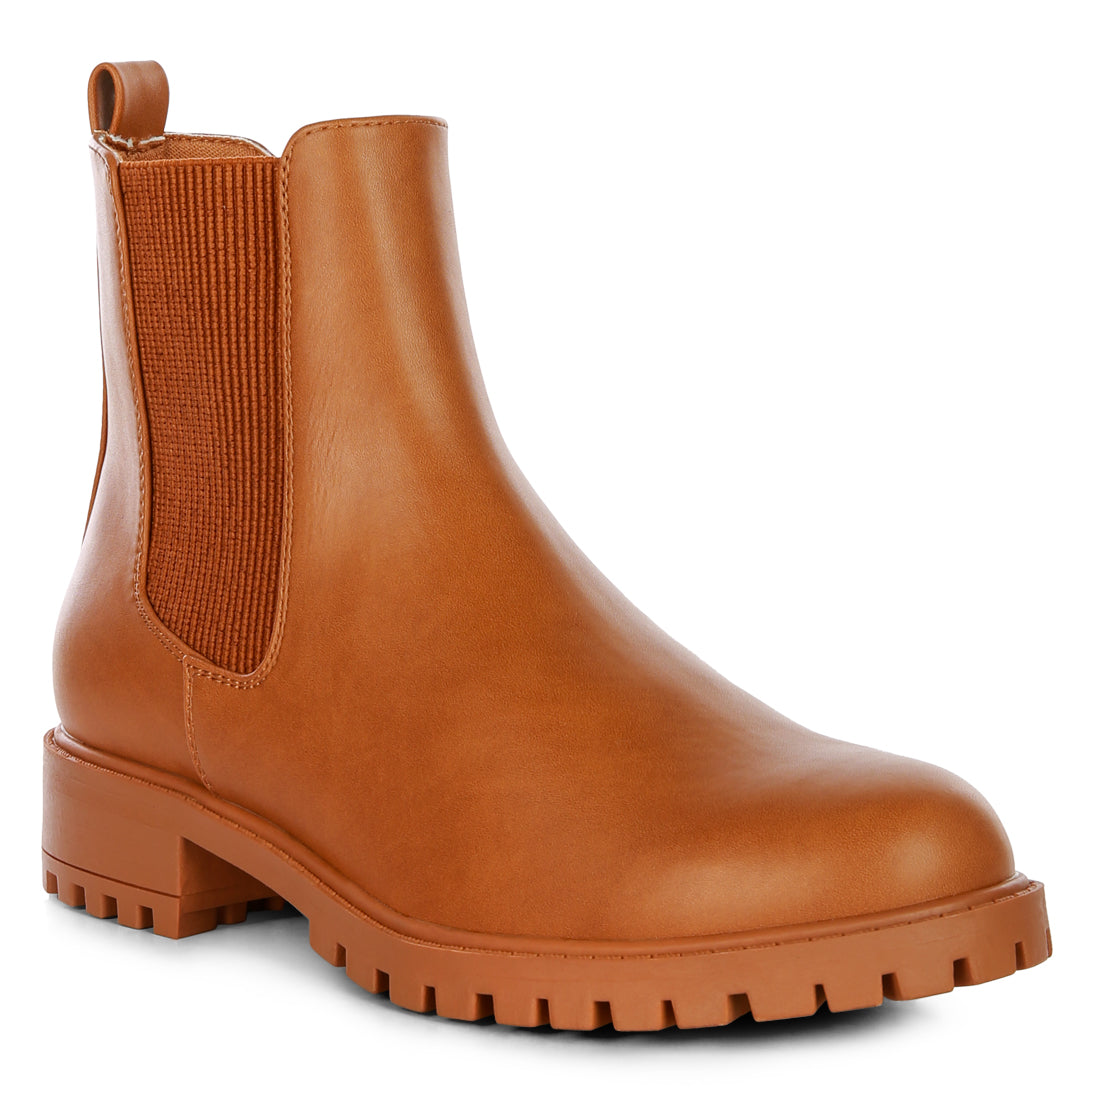 Tan Chelsea Styled Ankle Boot